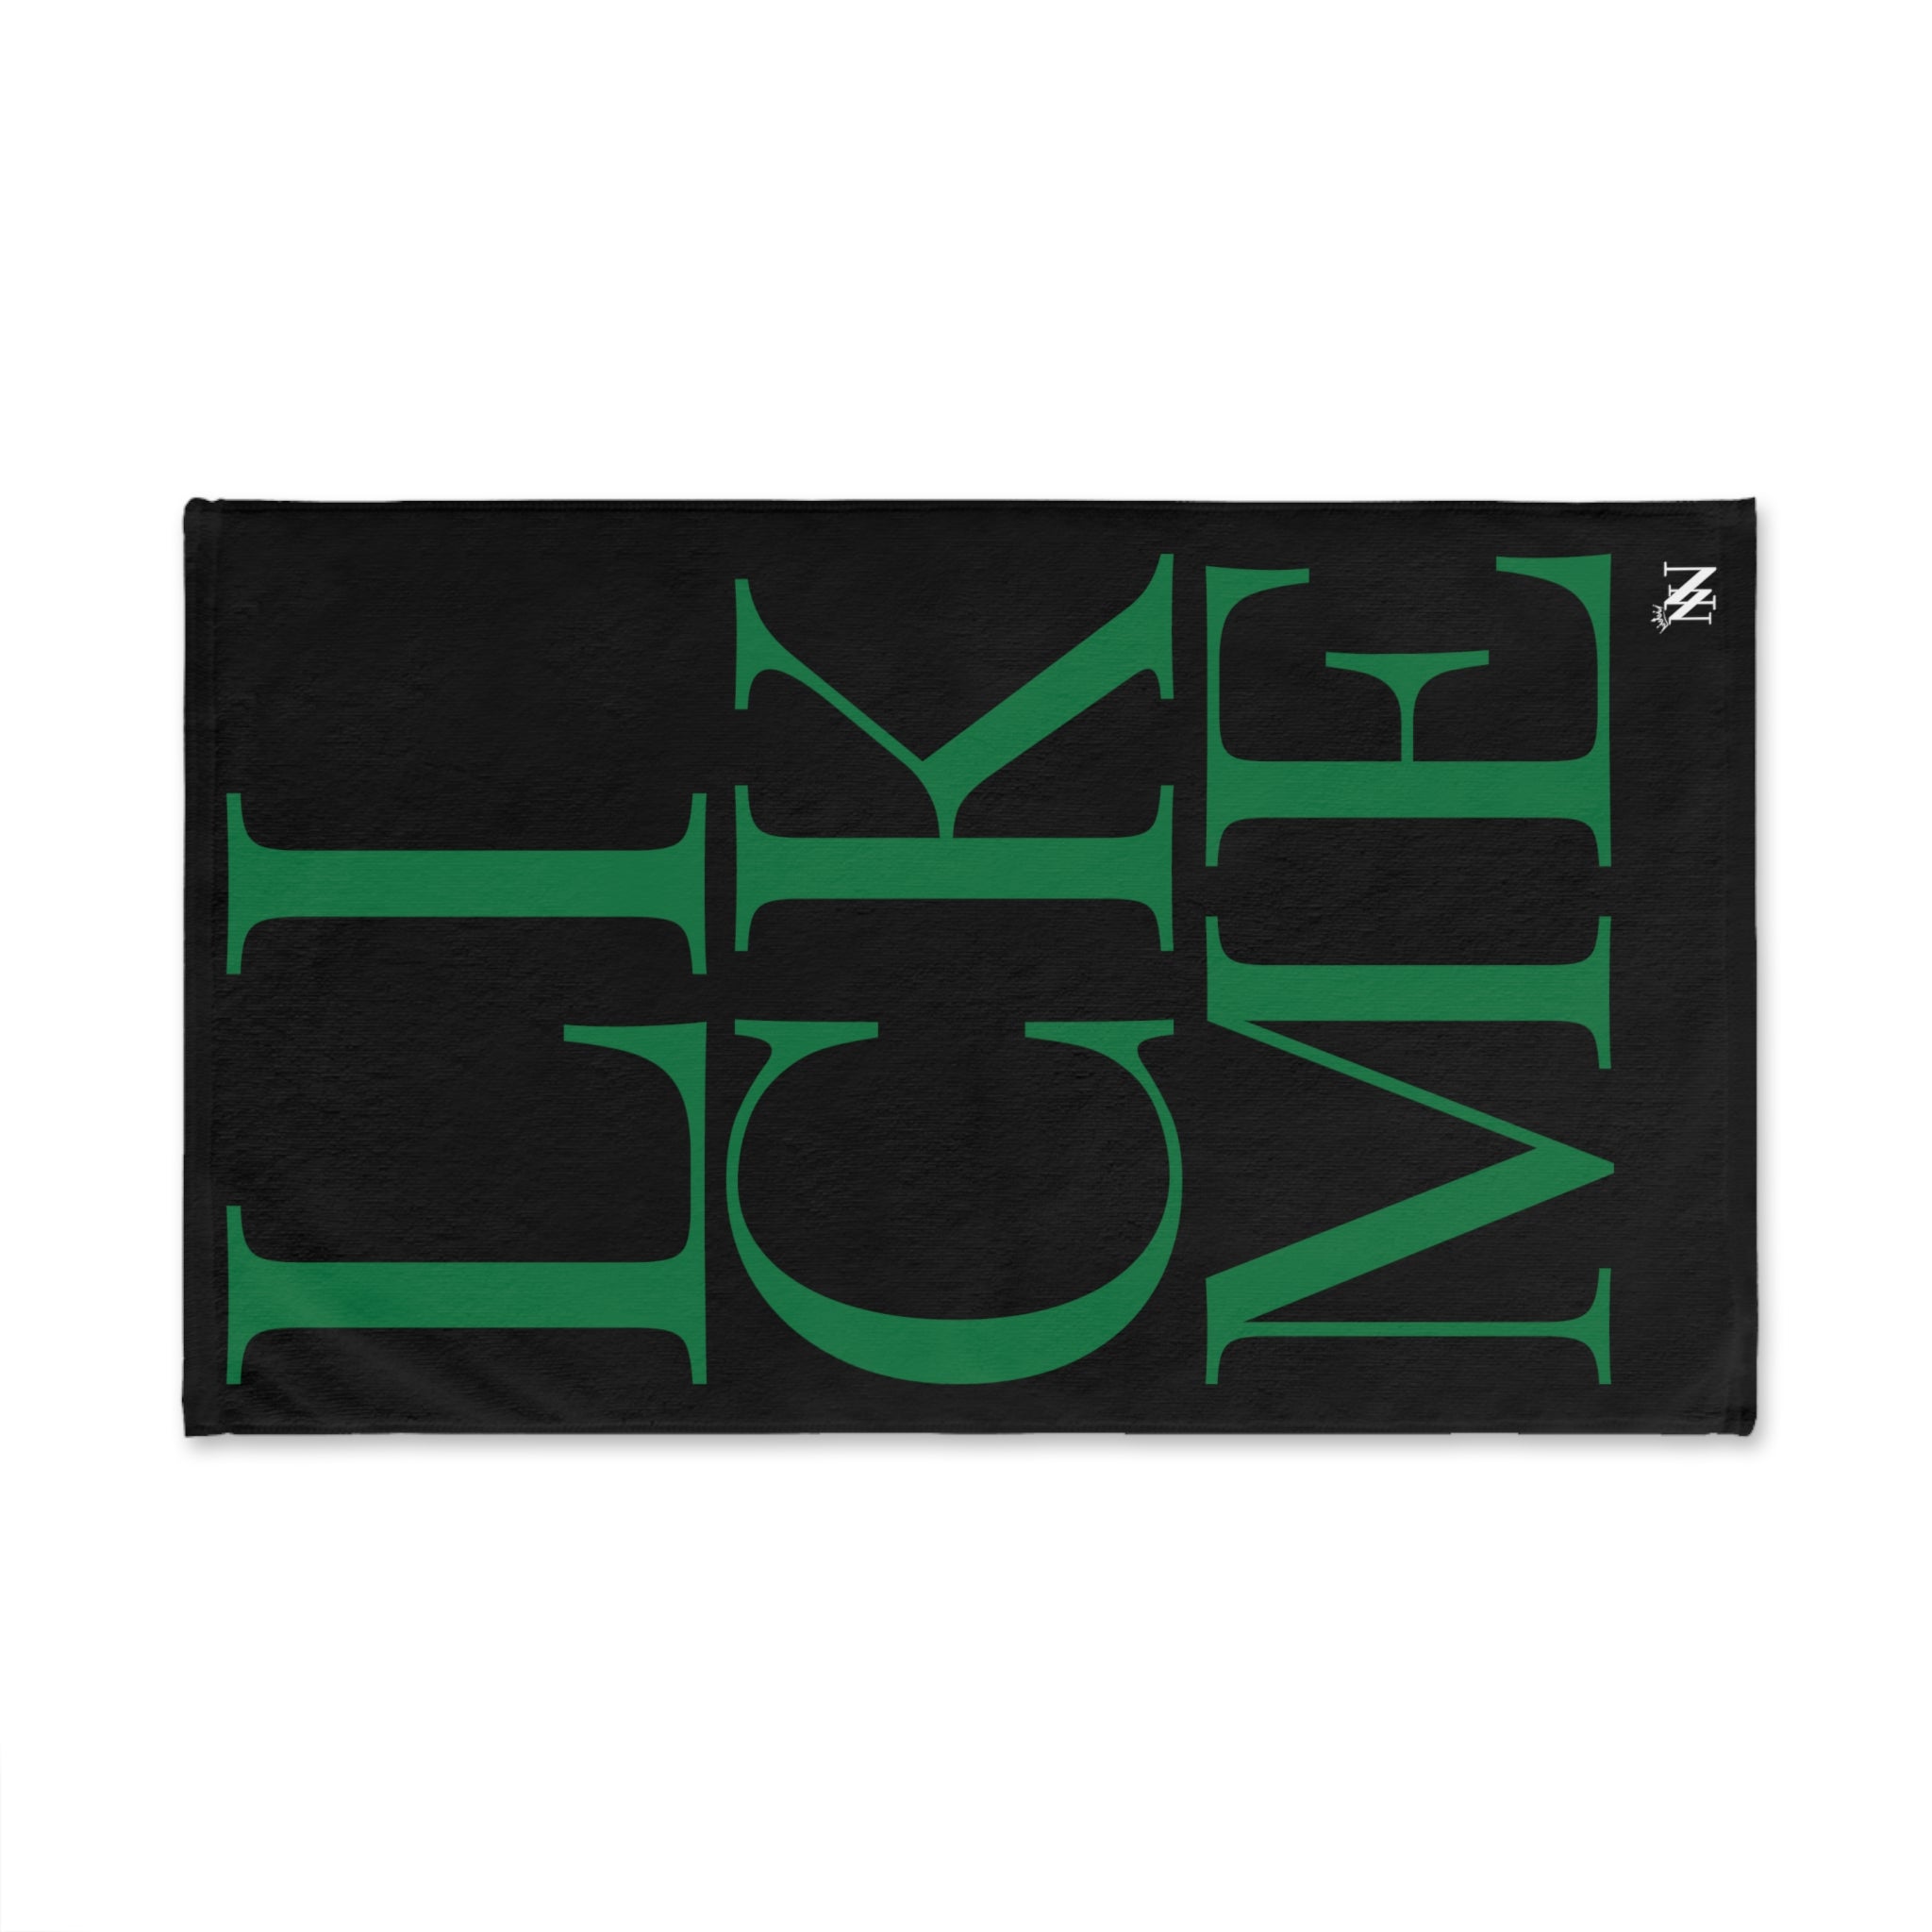 Lick Me GreenBlack | Sexy Gifts for Boyfriend, Funny Towel Romantic Gift for Wedding Couple Fiance First Year 2nd Anniversary Valentines, Party Gag Gifts, Joke Humor Cloth for Husband Men BF NECTAR NAPKINS